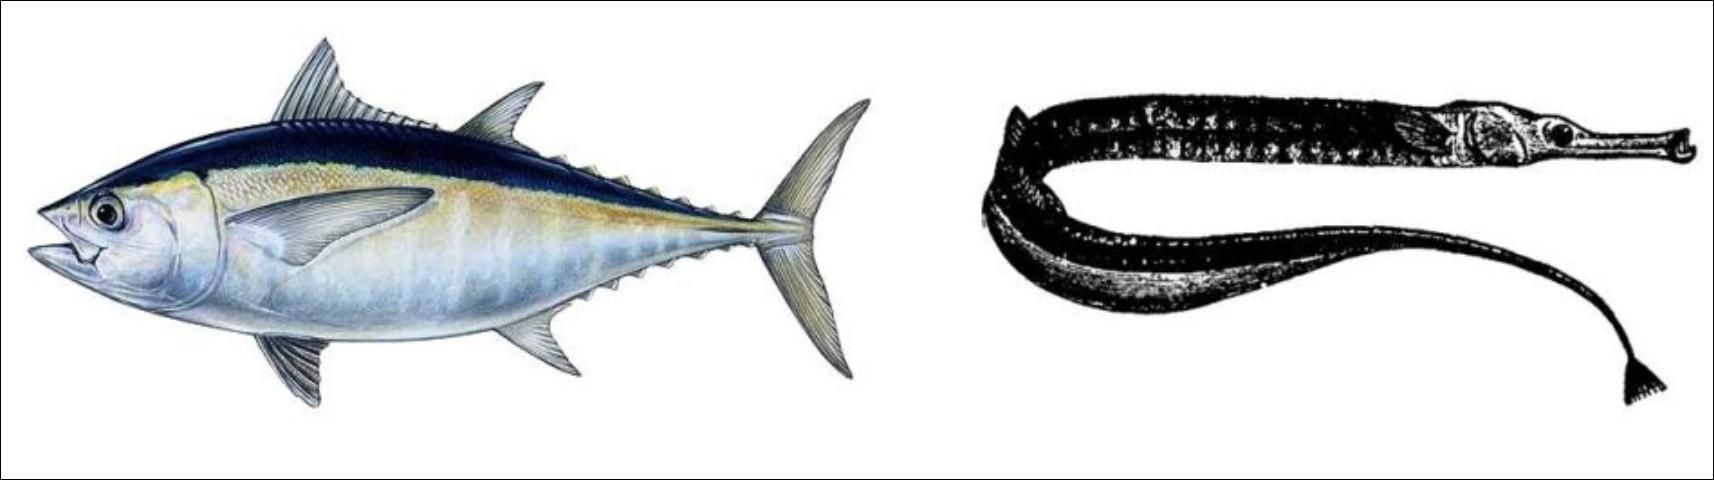 Figure 1. Black fin tuna and pipefish with terminal mouth.